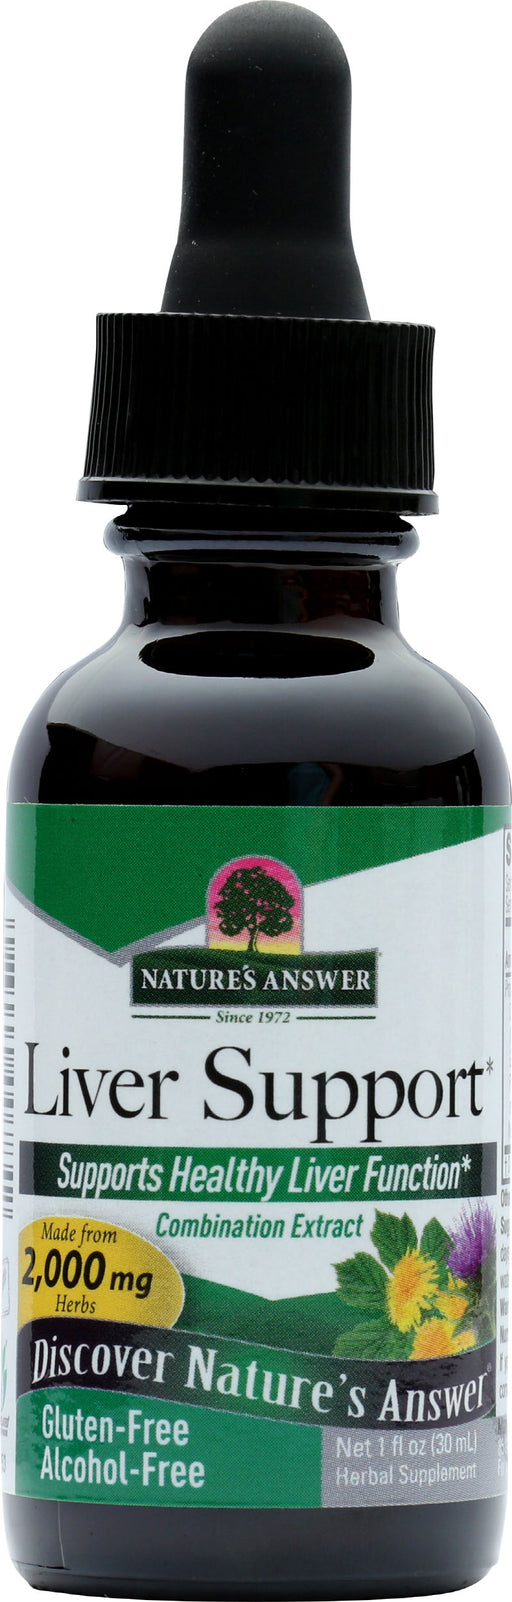 Nature's Answer Liver Support Herbal Blend Alcohol Free 30ml - Dennis the Chemist